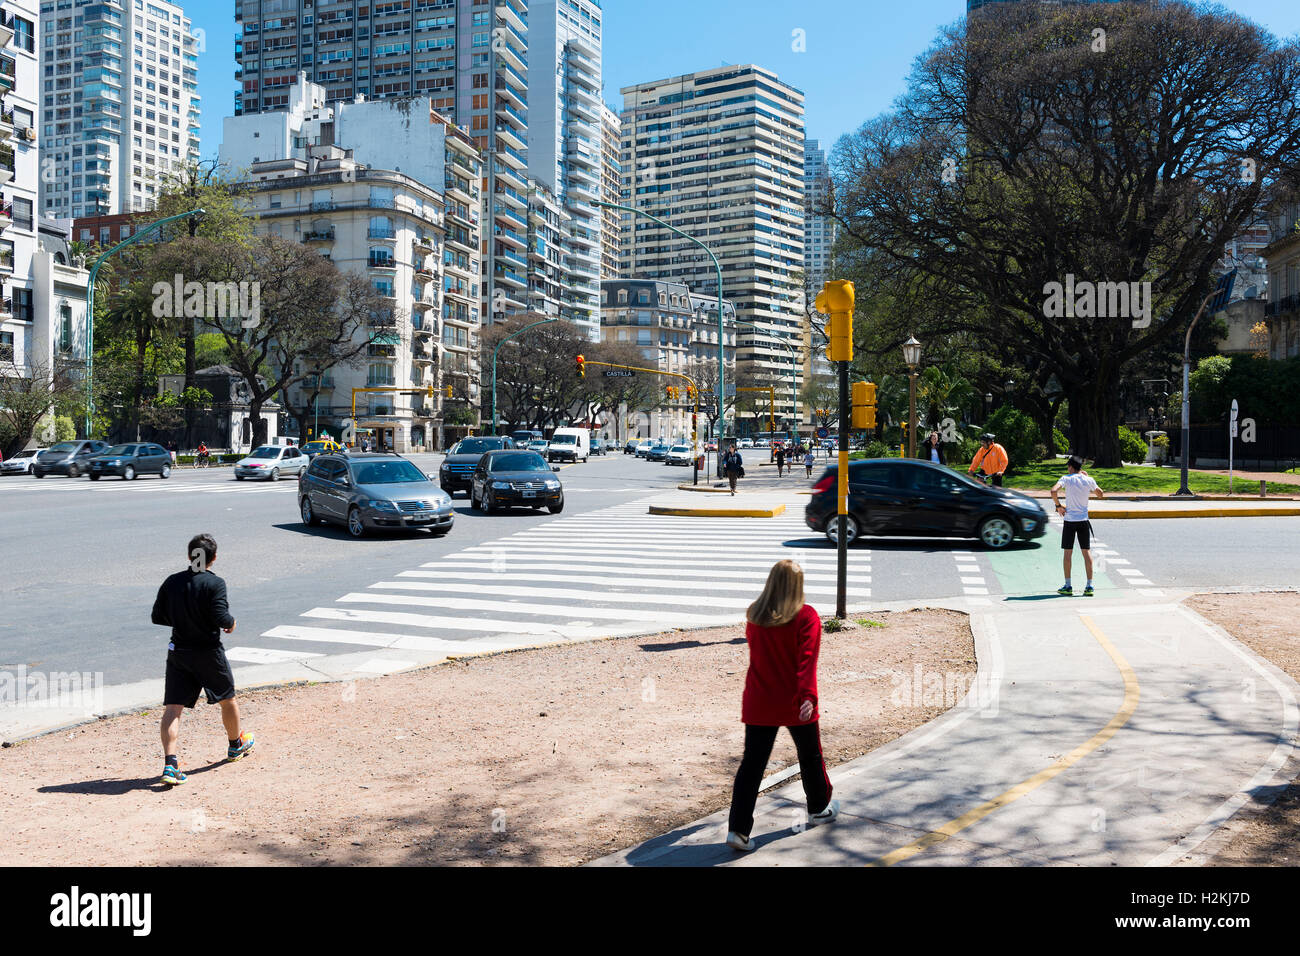 Buenos Aires, Argentina - October 5, 2013:  People in a street in the city of Buenos Aires, in Argentina Stock Photo